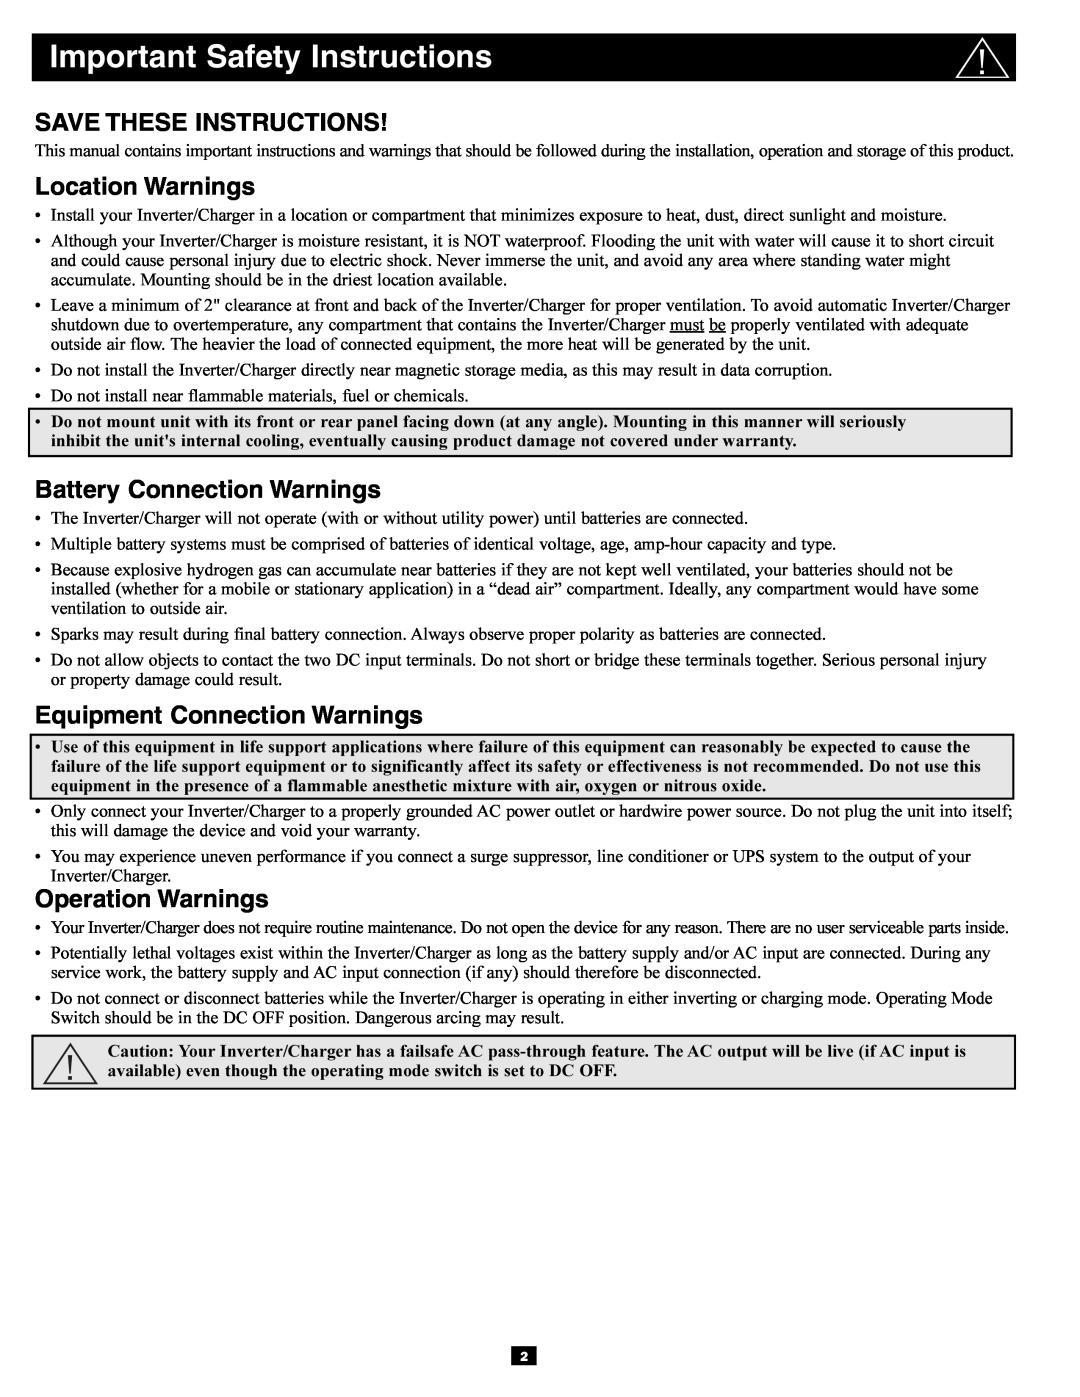 Tripp Lite APSRM4 Important Safety Instructions, Save These Instructions, Location Warnings, Battery Connection Warnings 